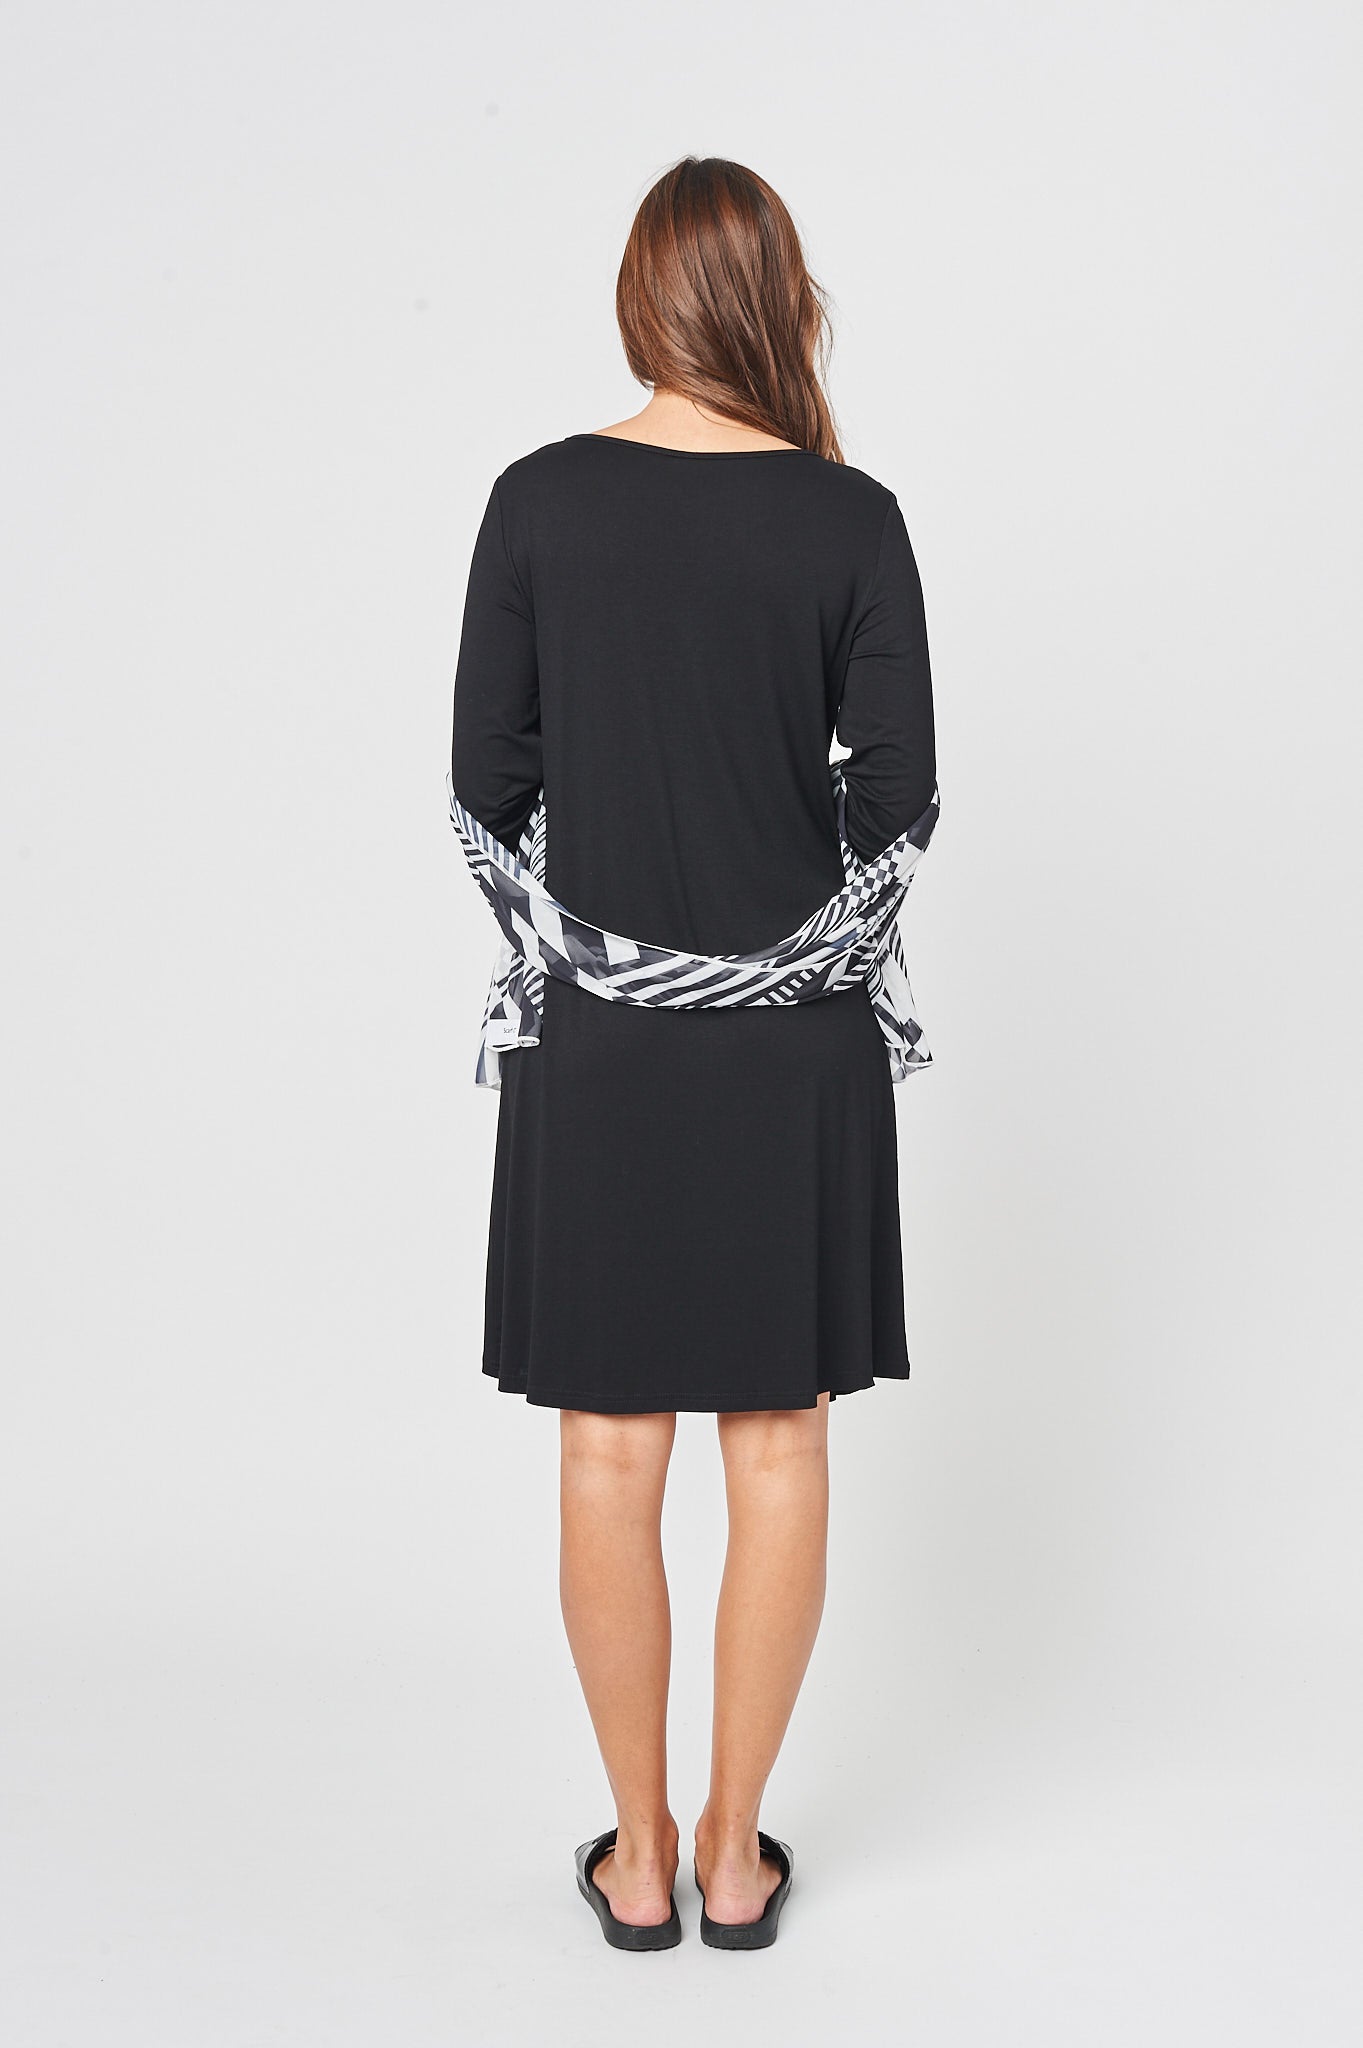 THE FEEL GOOD PLEATED DRESS IN CHARCOAL BLACK